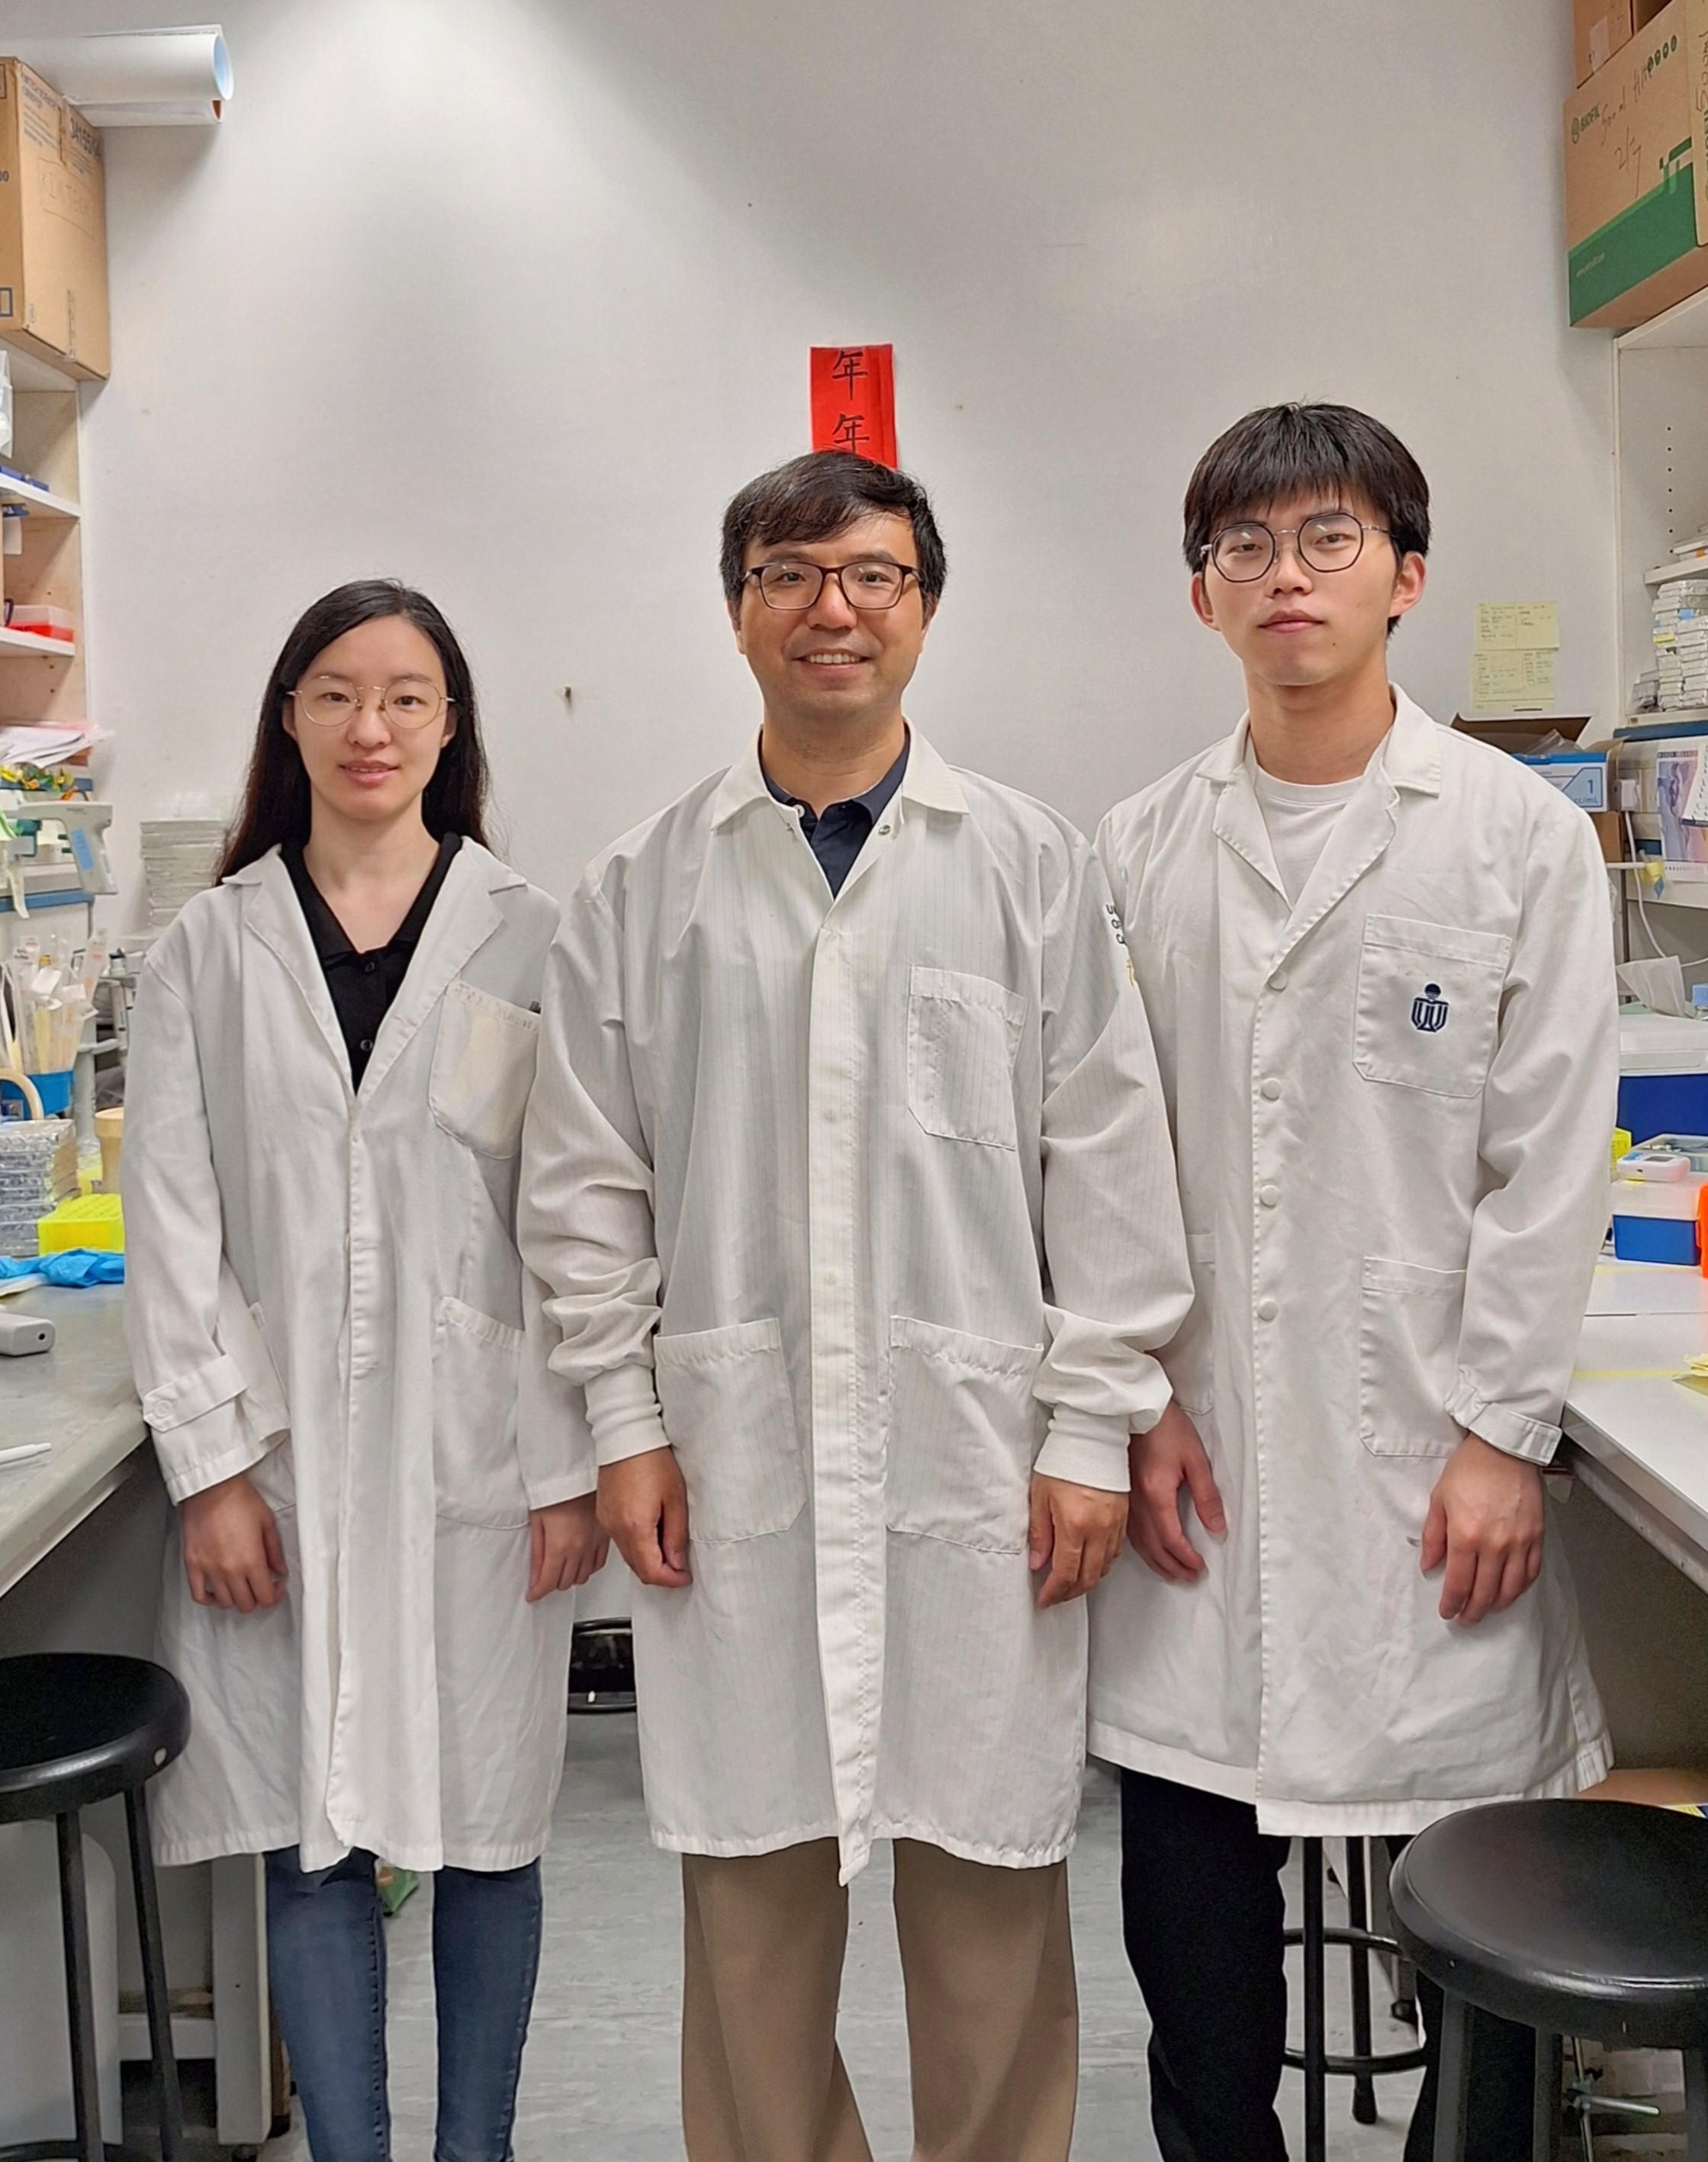 Prof. GUO Yusong (centre) and his research team at HKUST